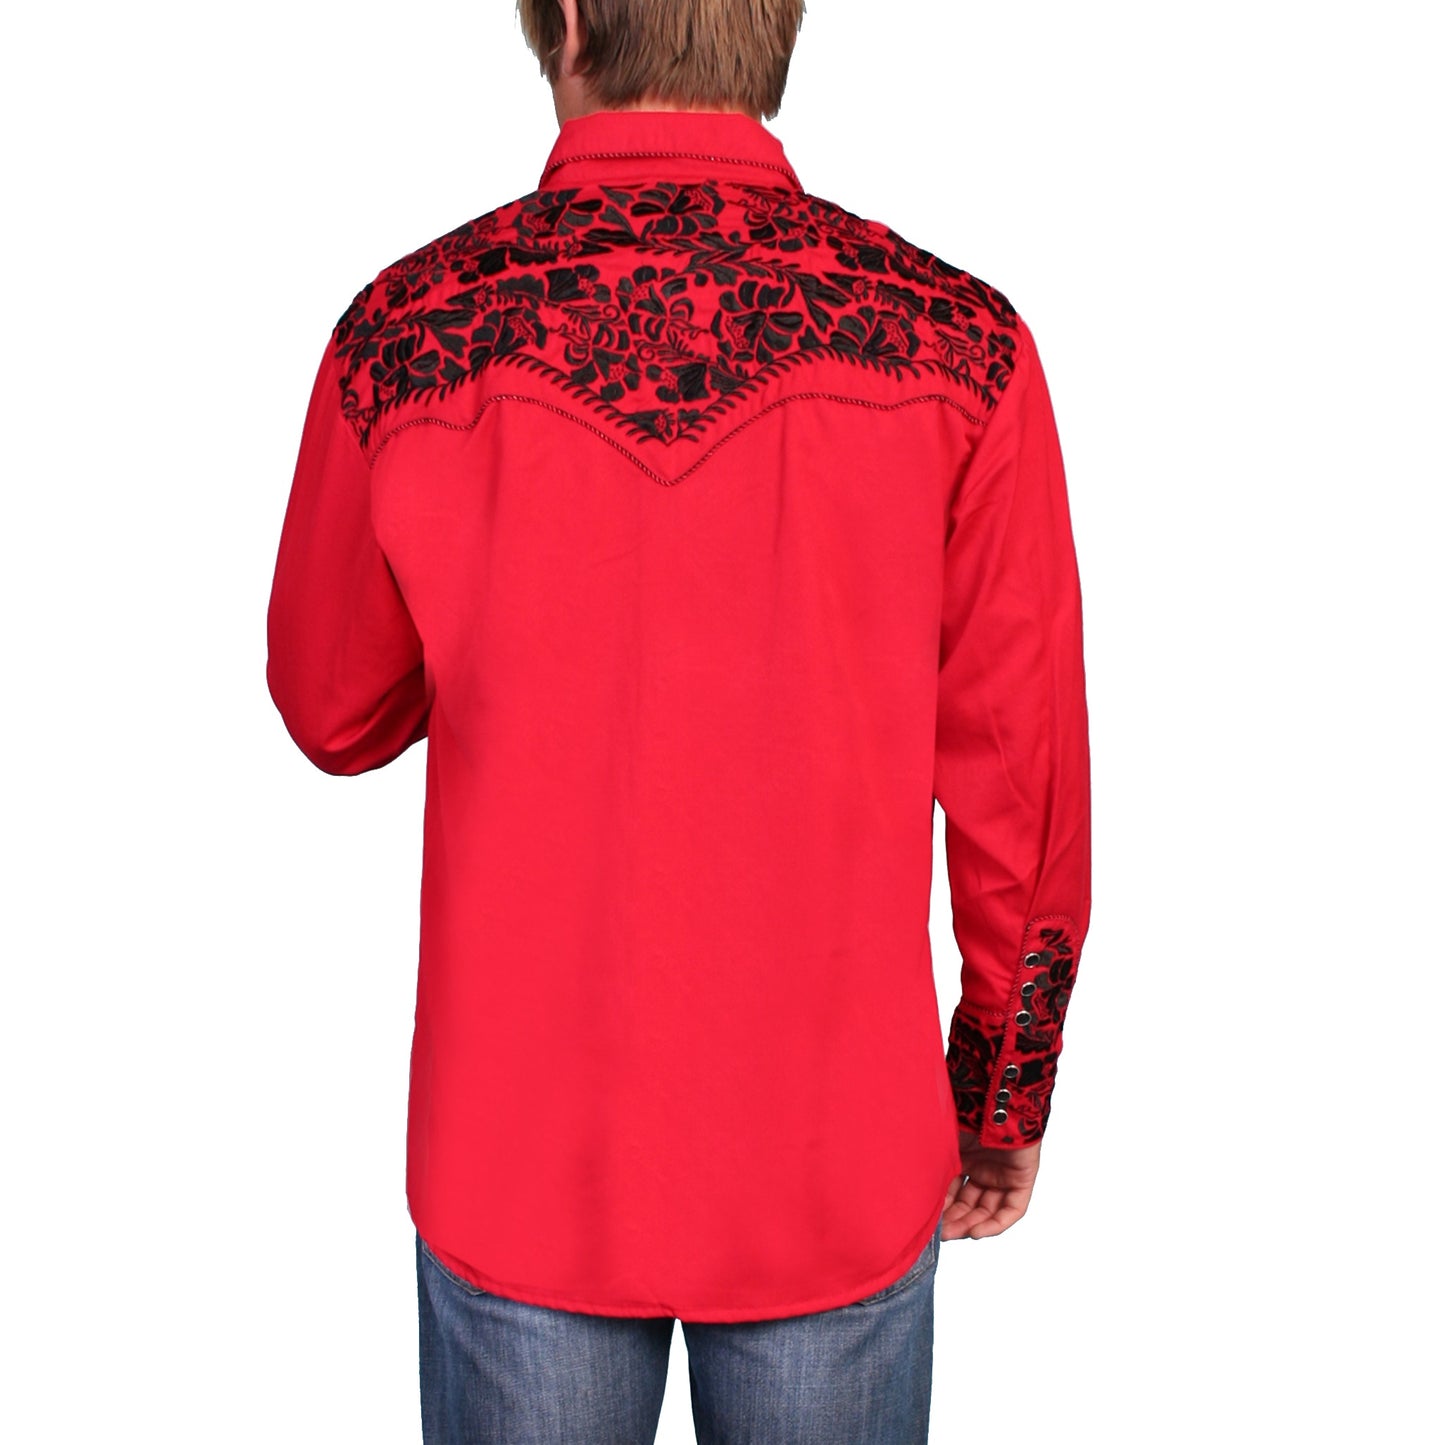 Scully Men's Floral Tooled Red Button Down Shirt P-634-RED